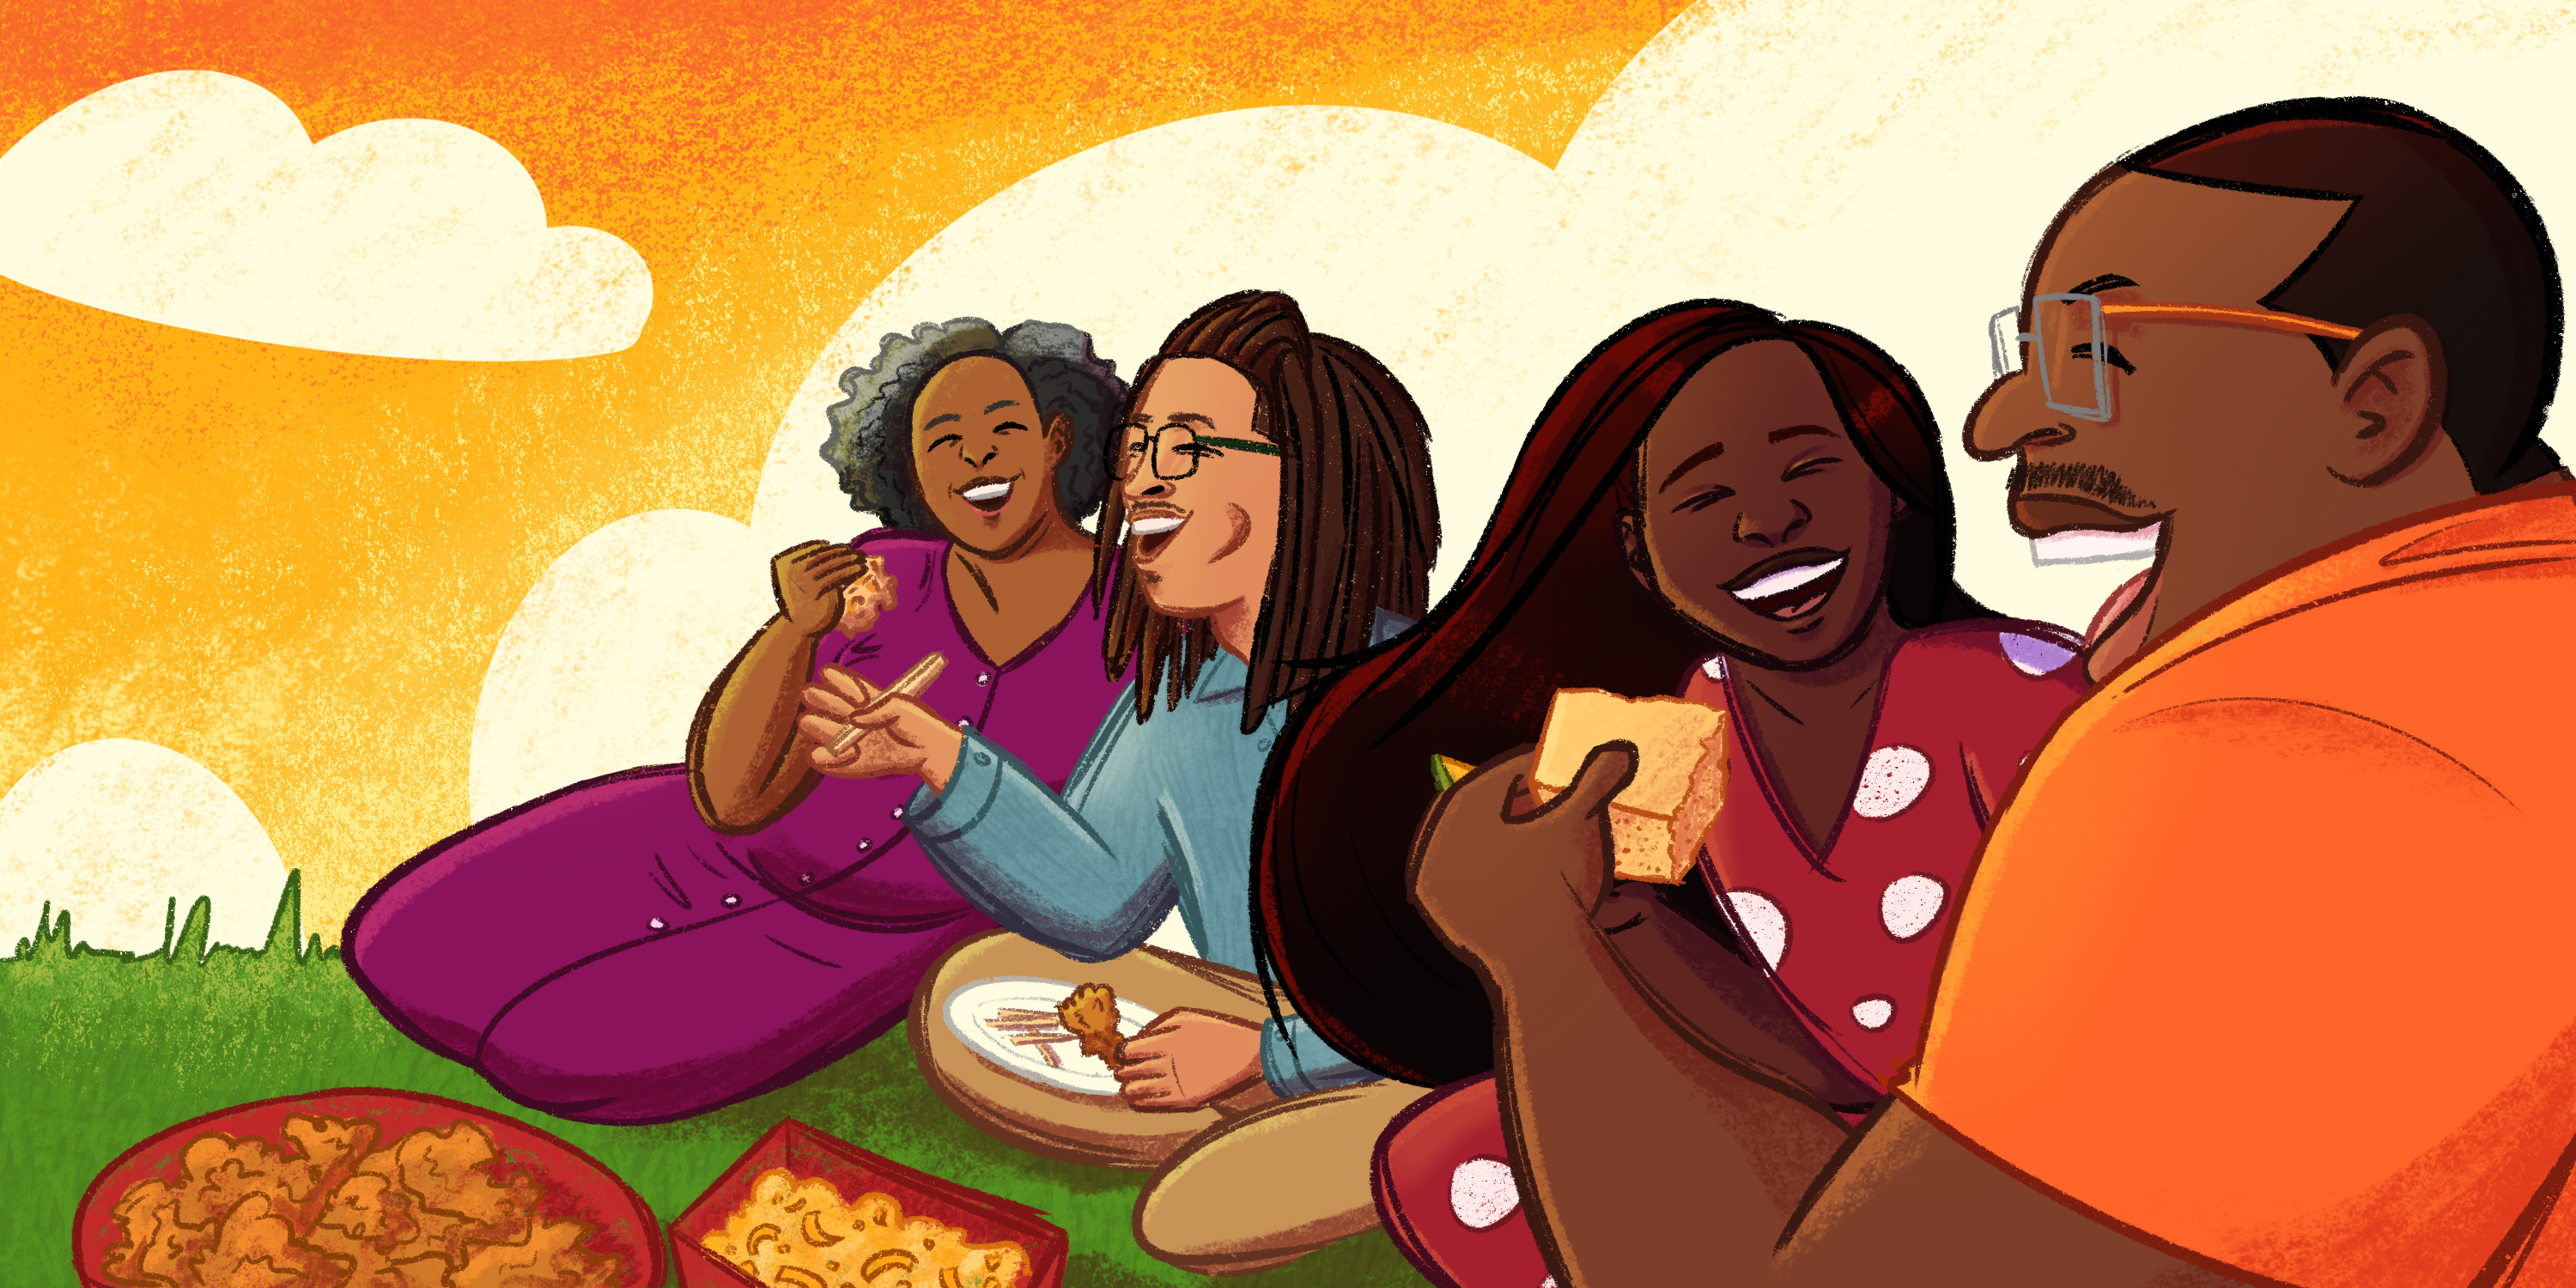 A group of four Black people eating on grass. They are smiling and laughing eating corn break, chicken. There are clouds and a sunset in the background.